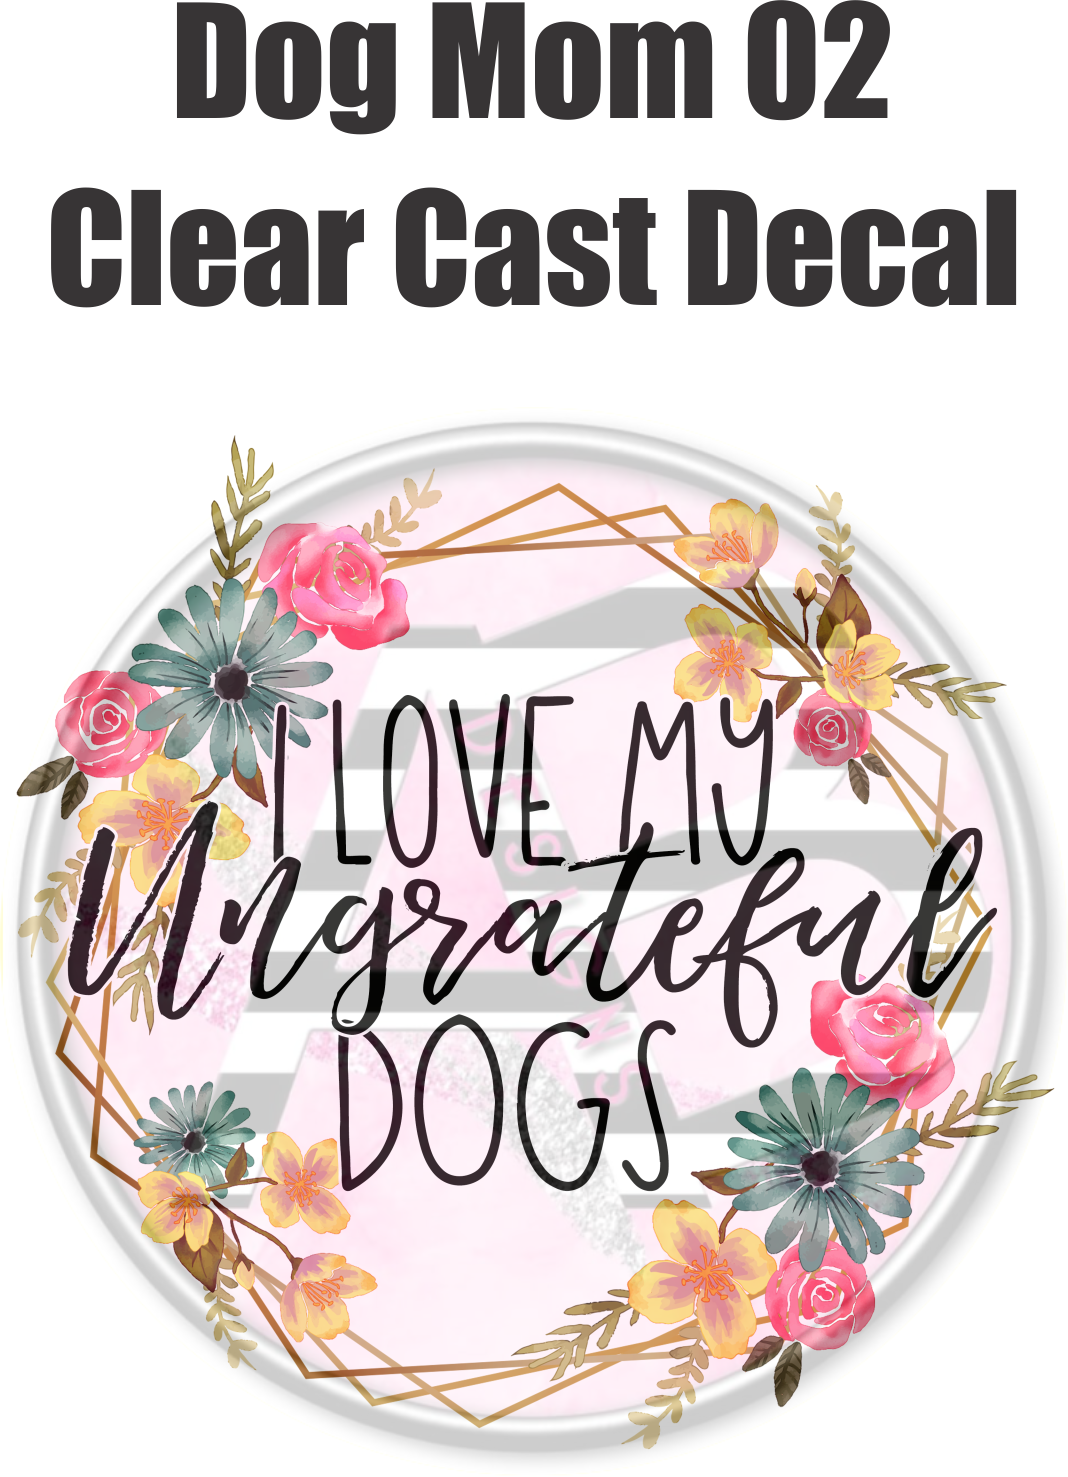 Dog Mom 02 - Clear Cast Decal